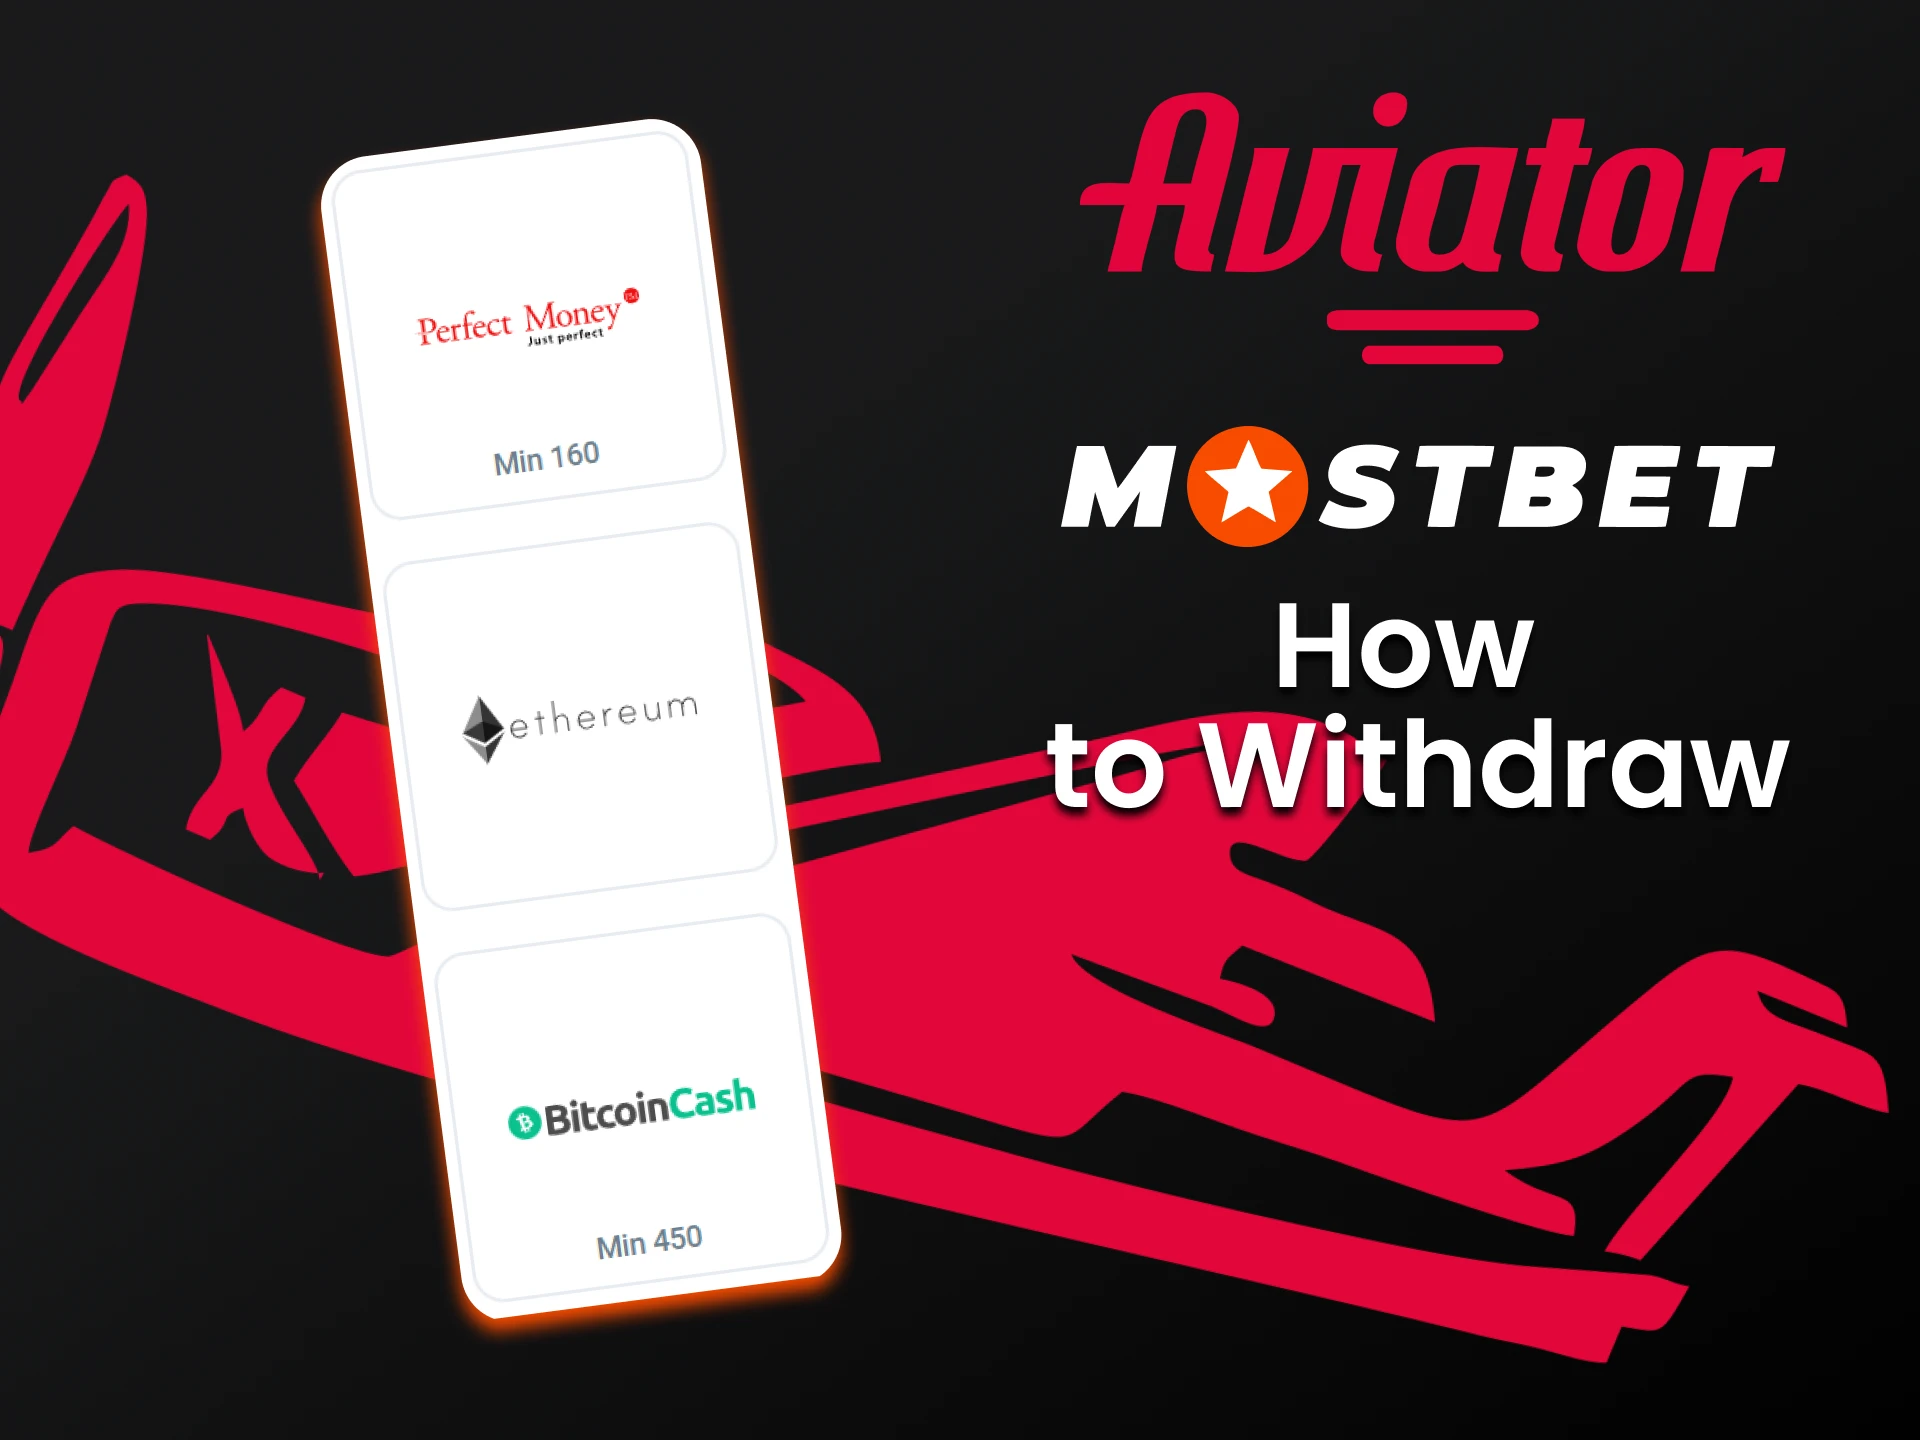 Choose a convenient way to withdraw money from Mostbet.